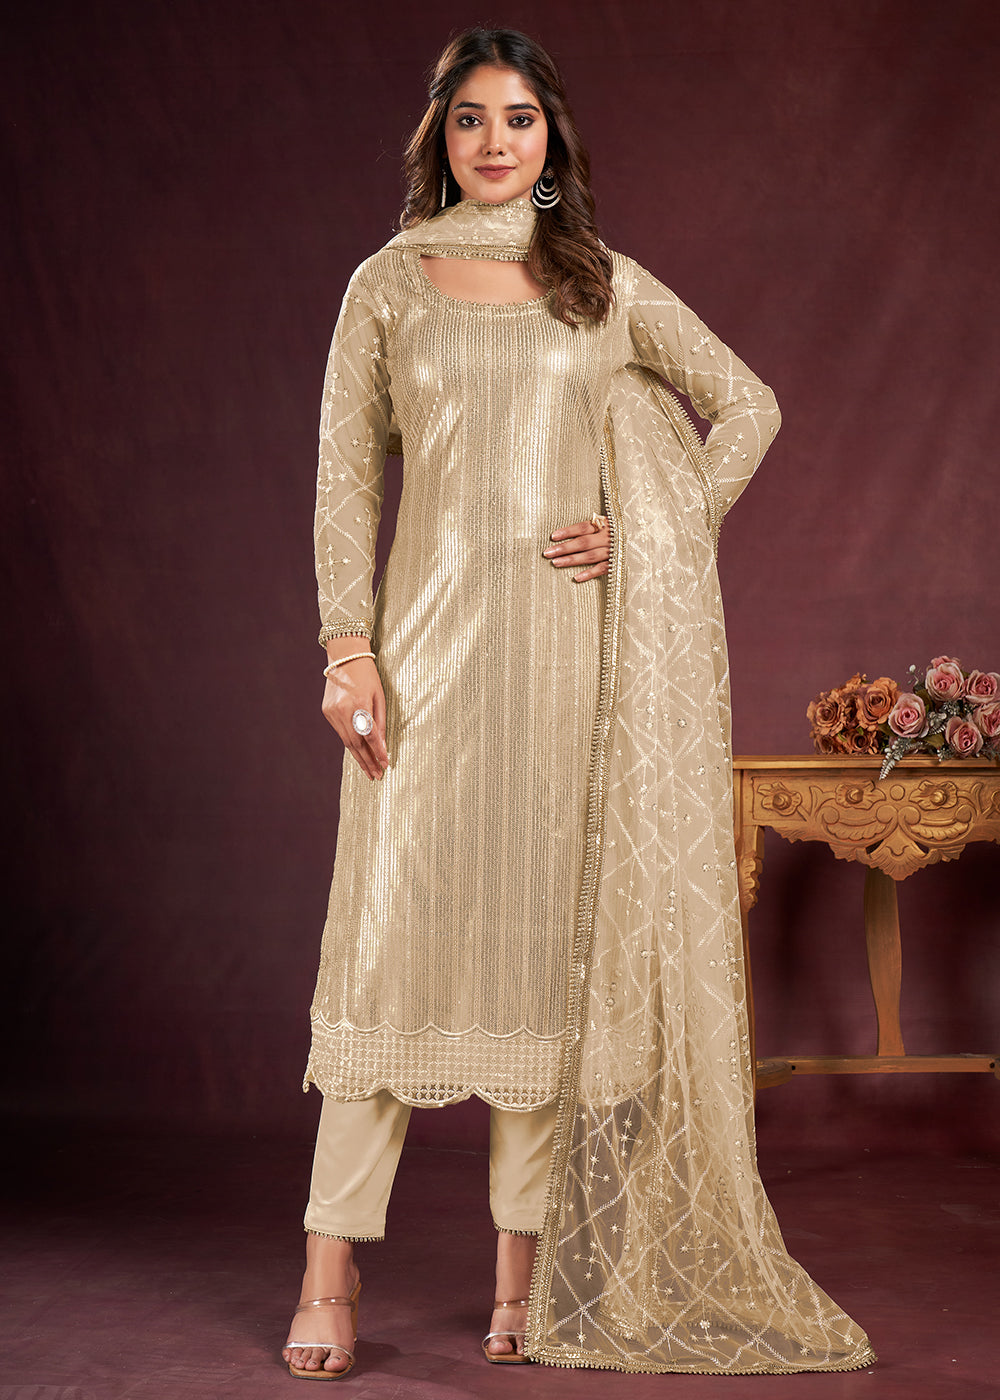 Buy Now Gold Beige Butterfly Net Embroidered Festive Salwar Suit Online in USA, UK, Canada, Germany, Australia & Worldwide at Empress Clothing.